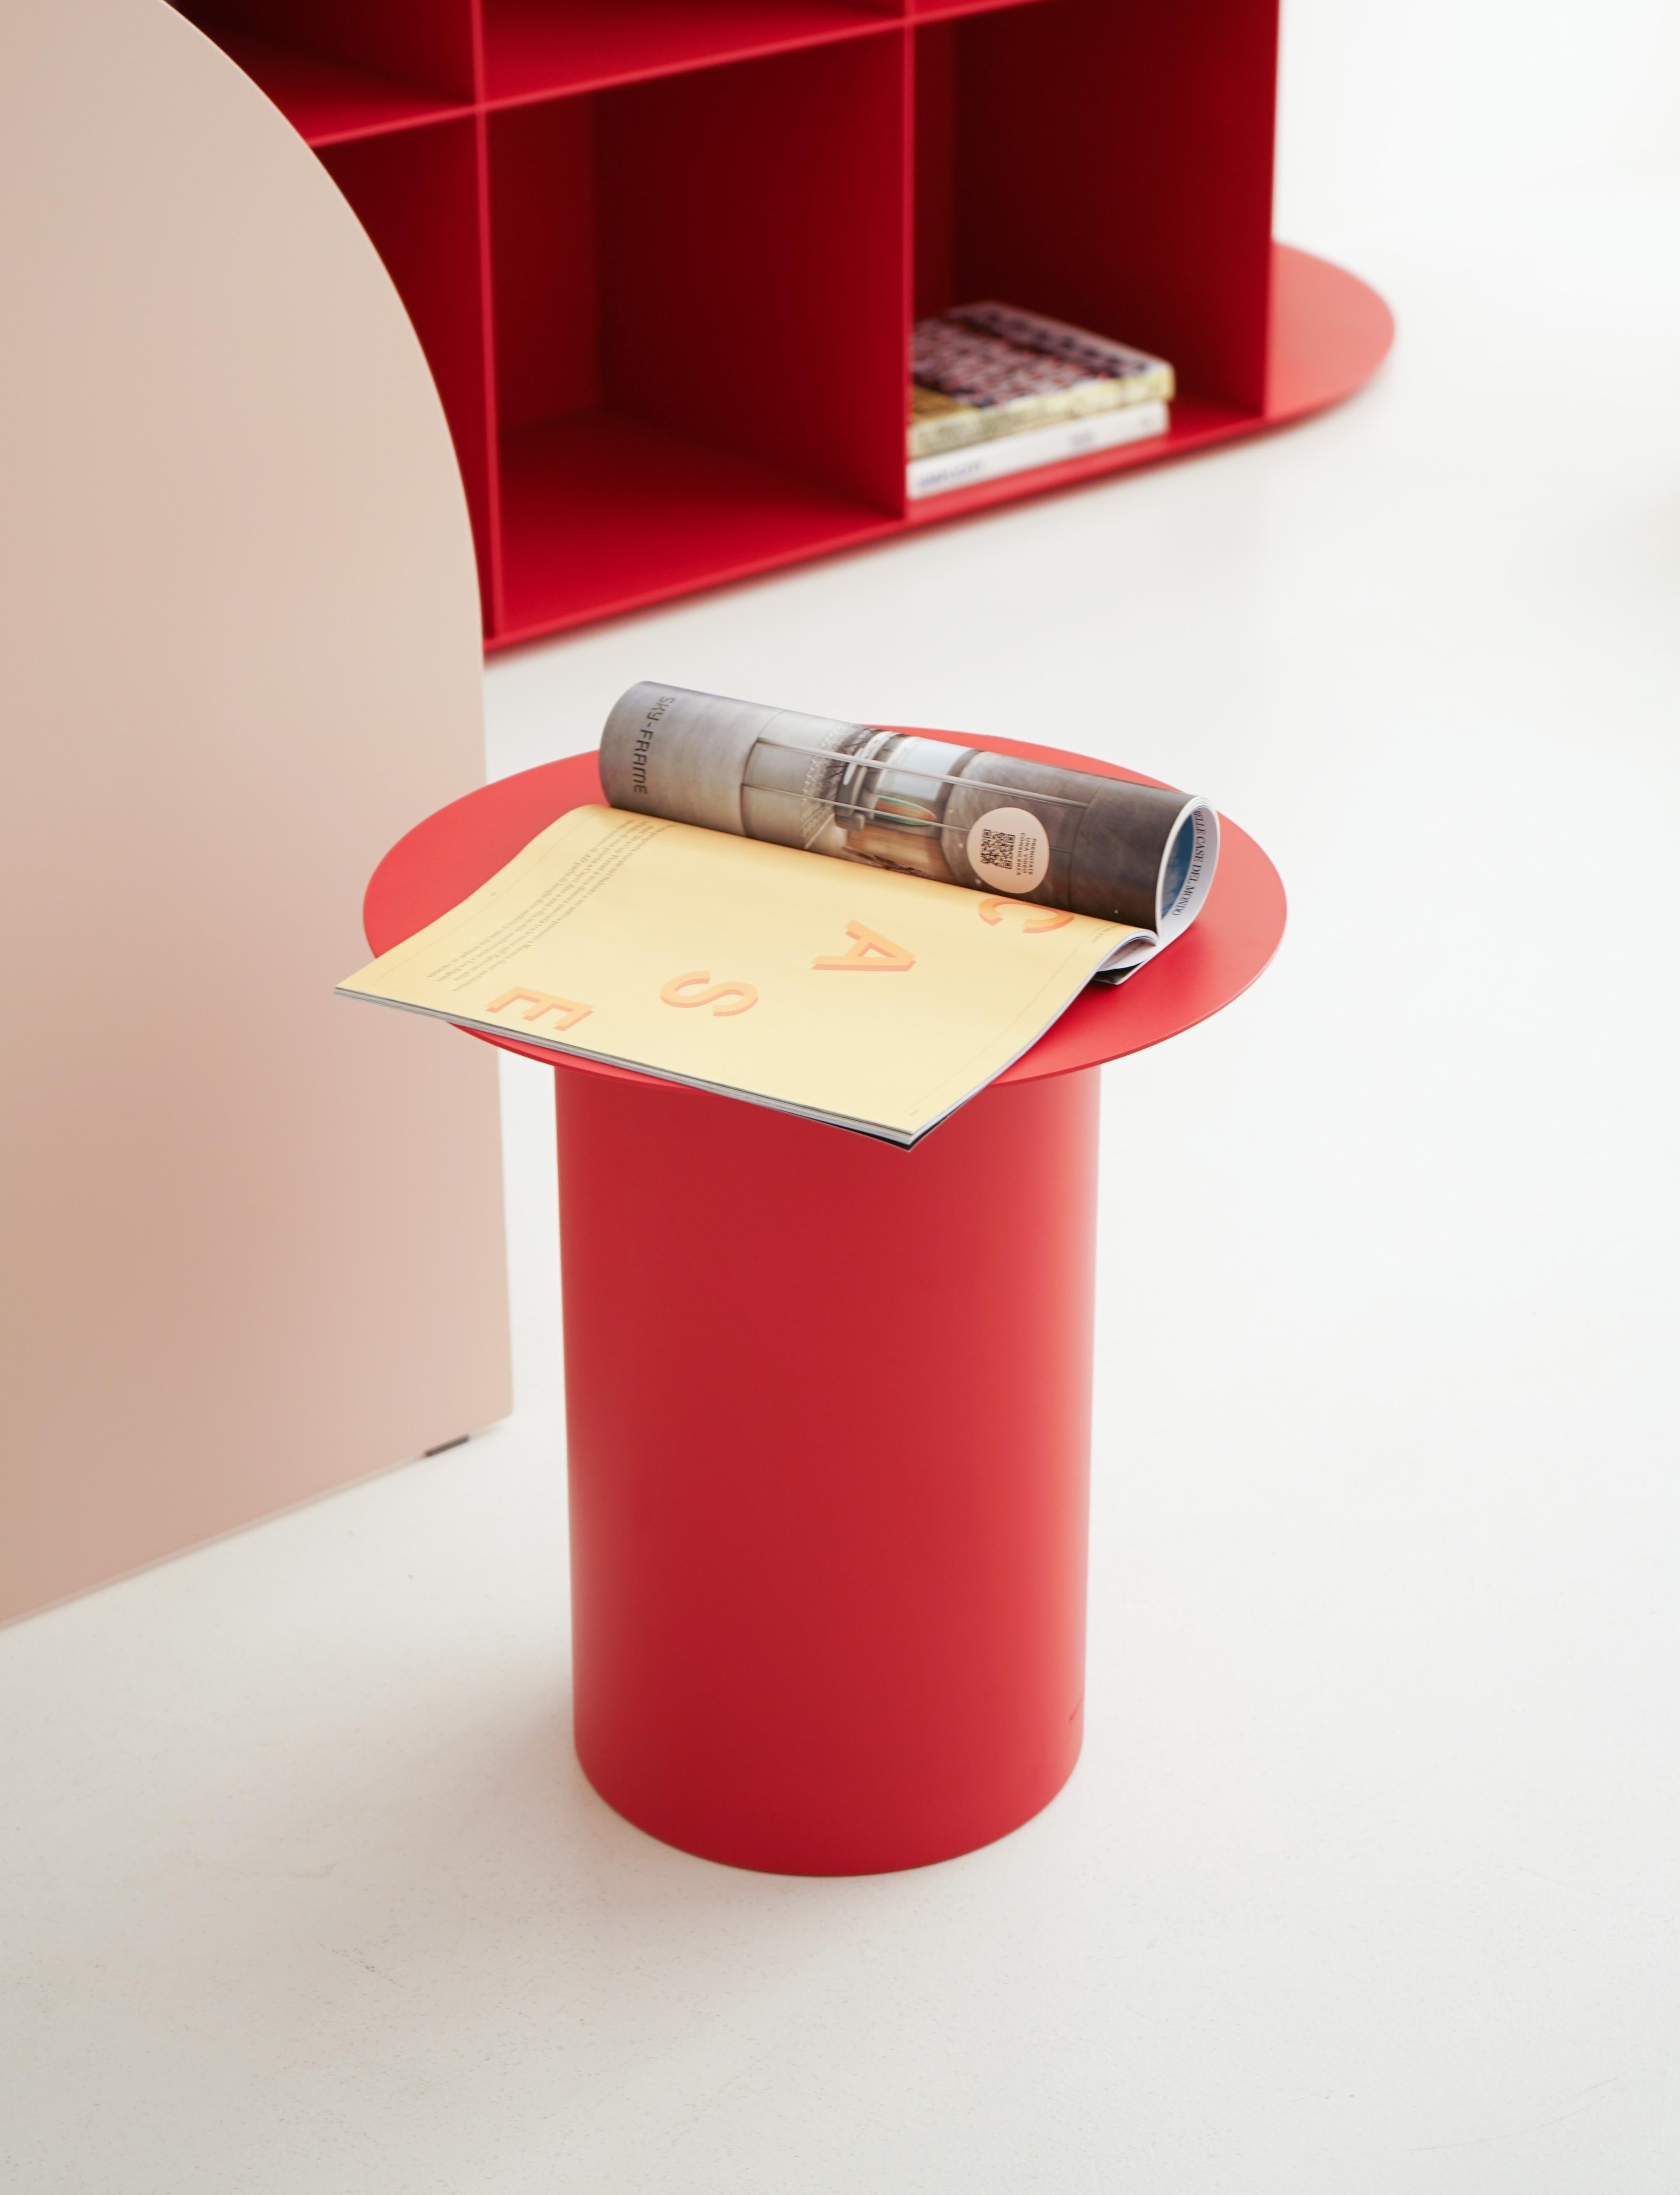 Chiodo 4 can be used as a seat, as a bedside table, as a coffee table or on terraces. It is perfect for pairing as a chair for the table Chiodo 7.
Recommended for those who love to change and play with their furnishings.

The Chiodo series is a